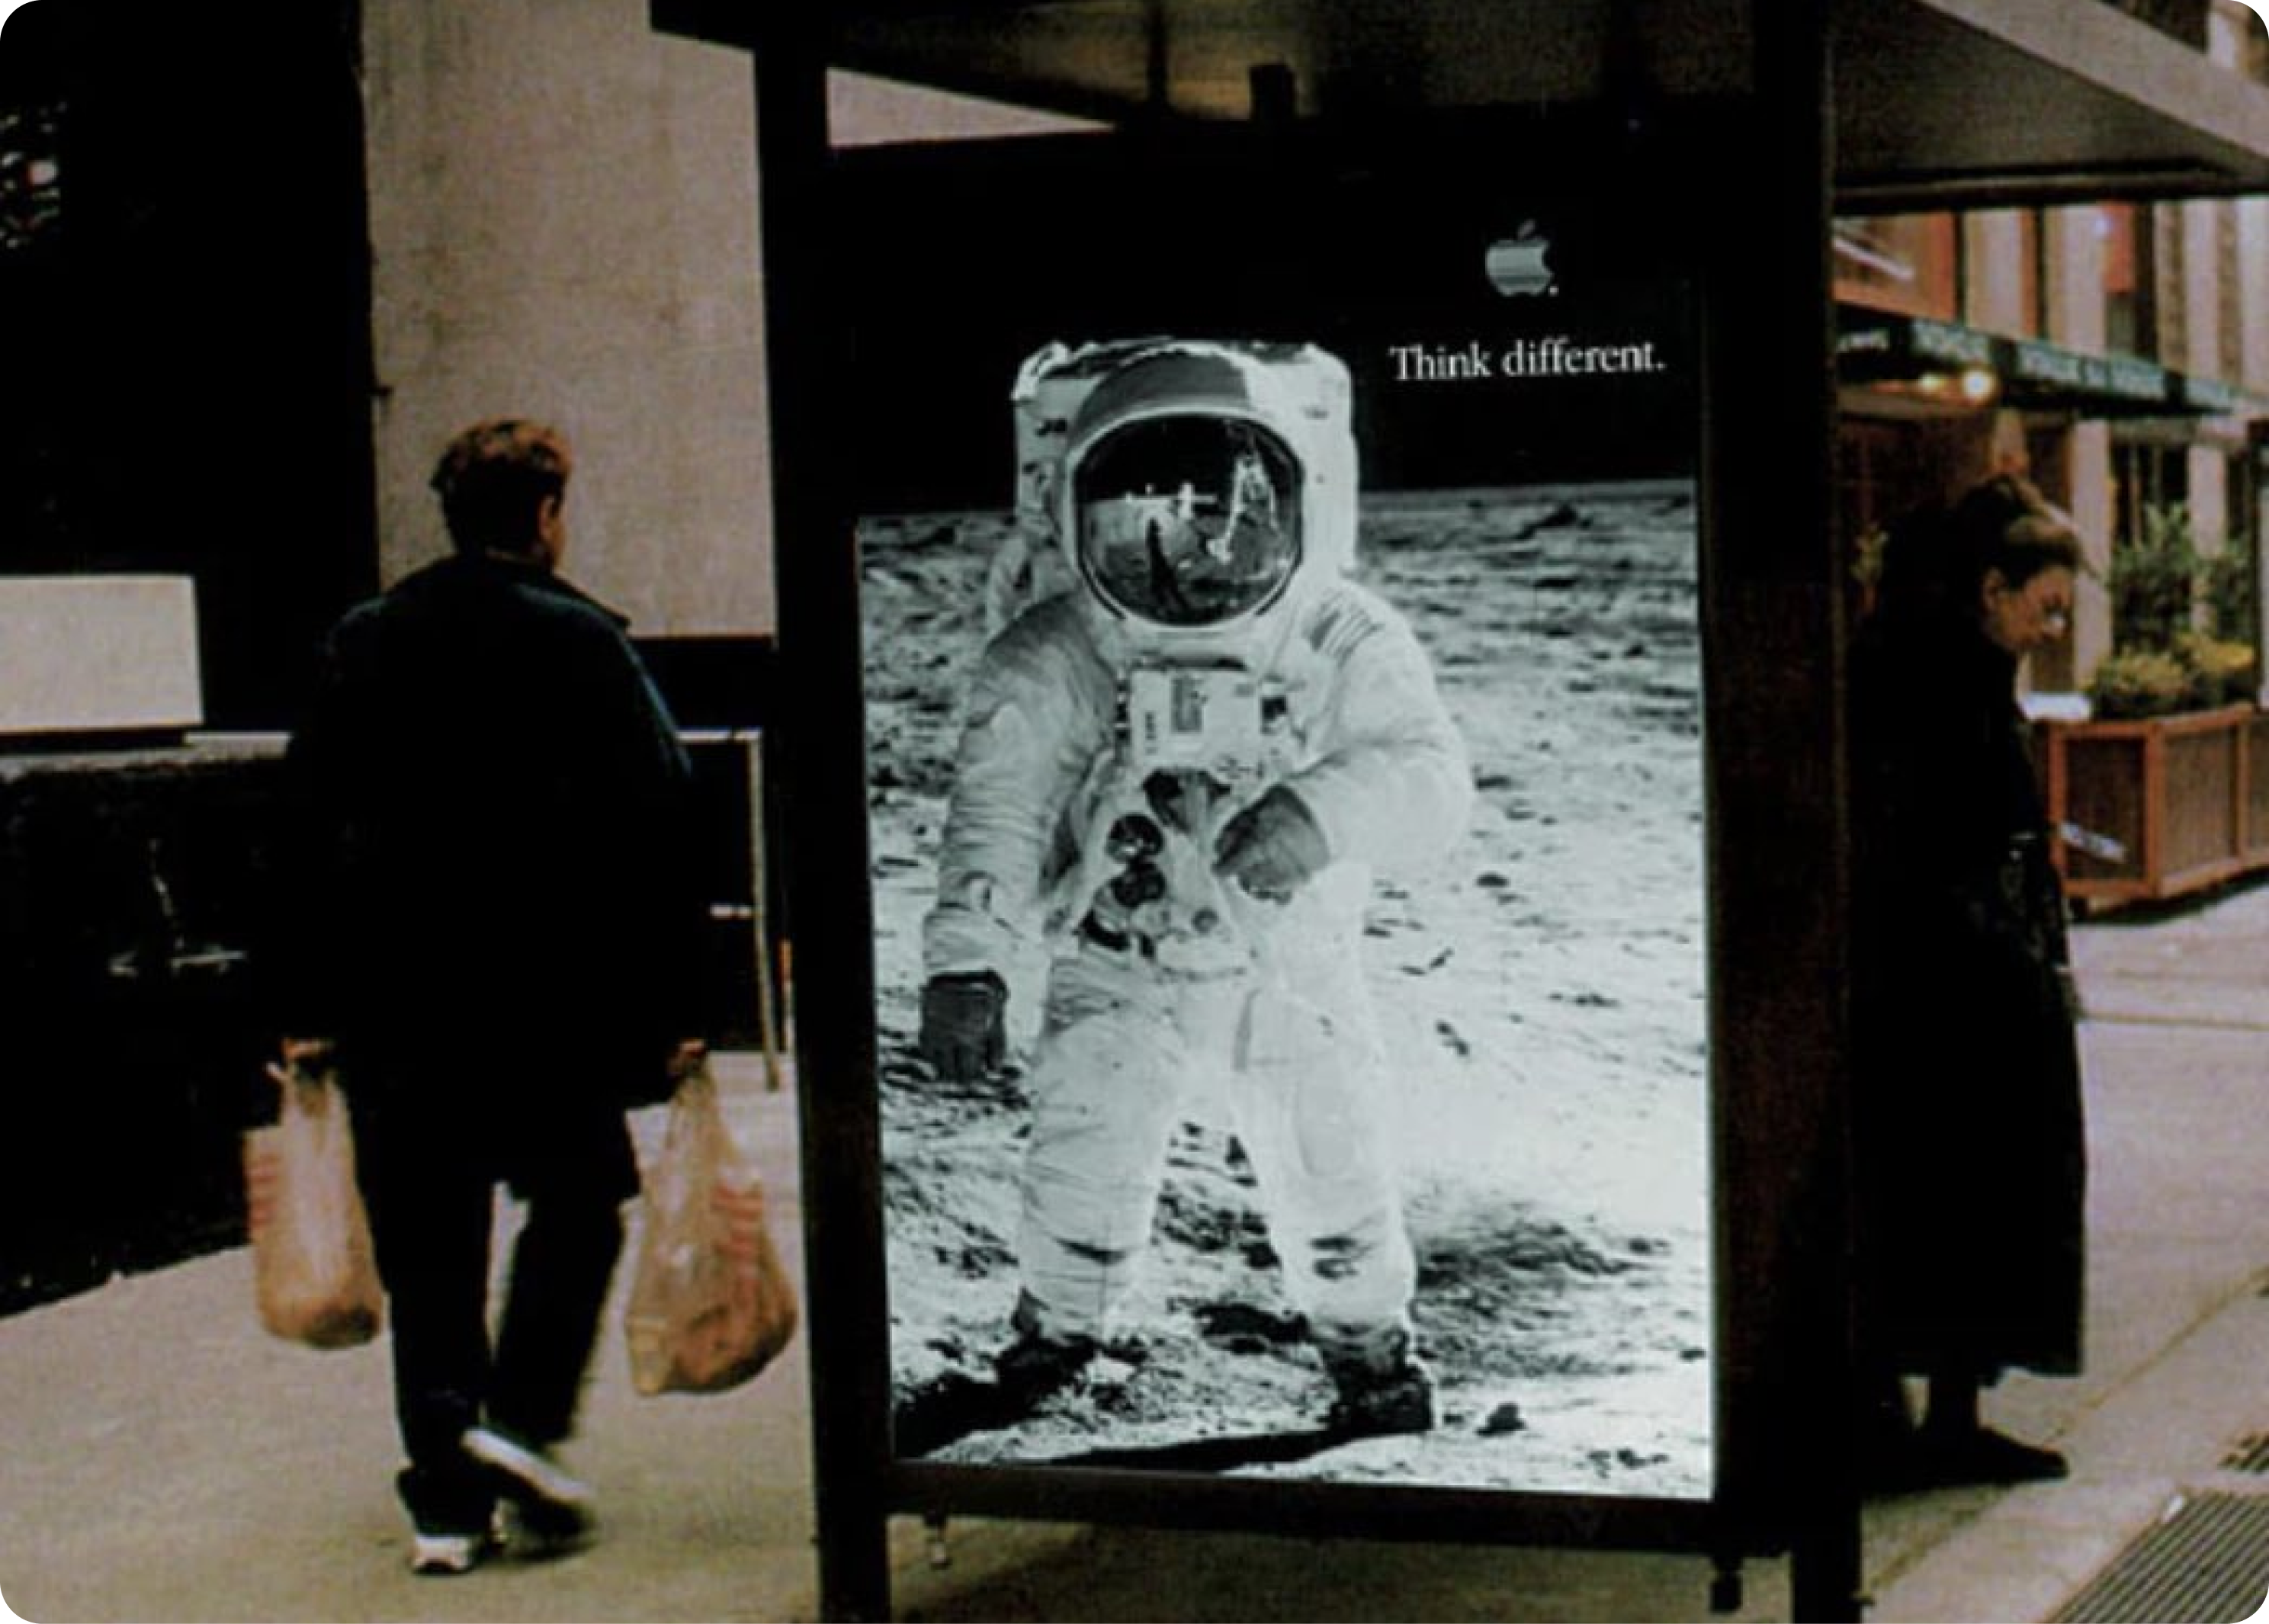 An Apple ‘Think Different’ campaign poster featuring Astronaut Buzz Aldrin.